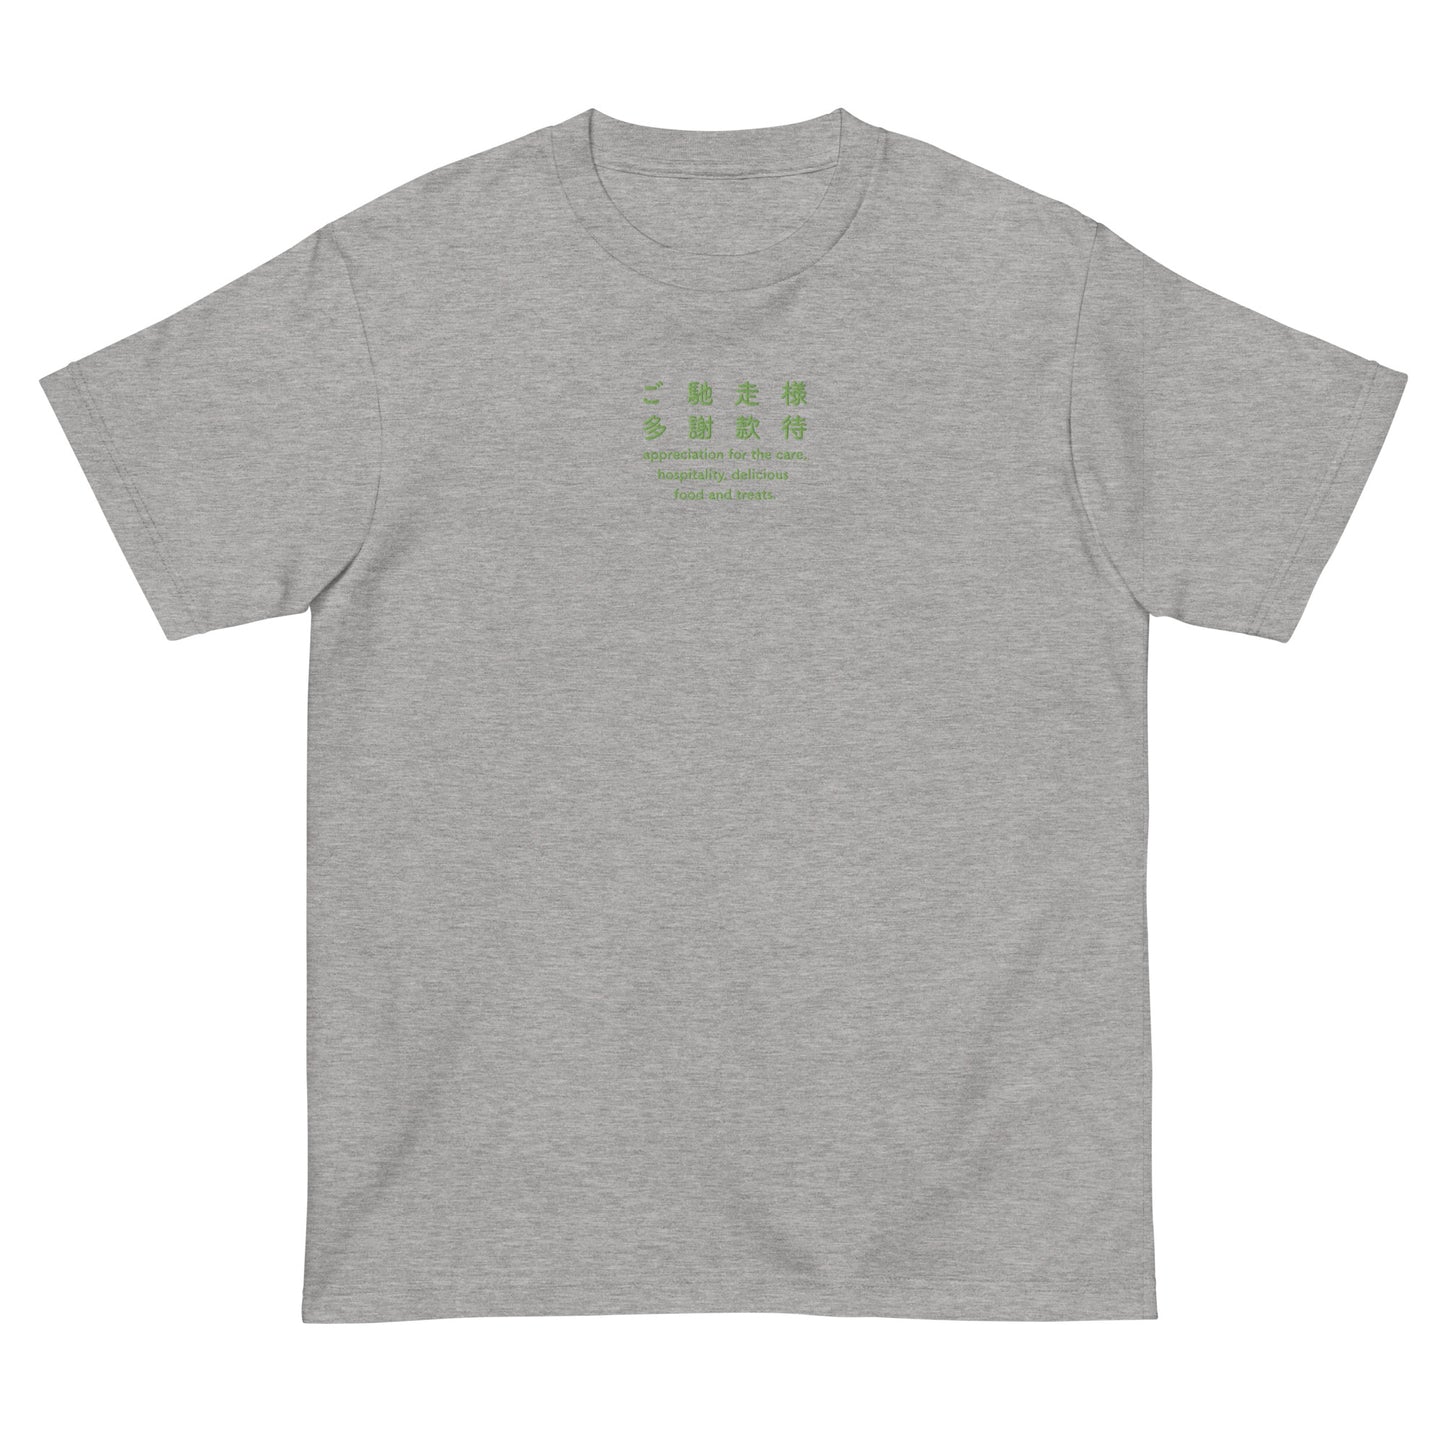 Light Gray High Quality Tee - Front Design with an Green Embroidery "Gochisosama" in Japanese,Chinese and English